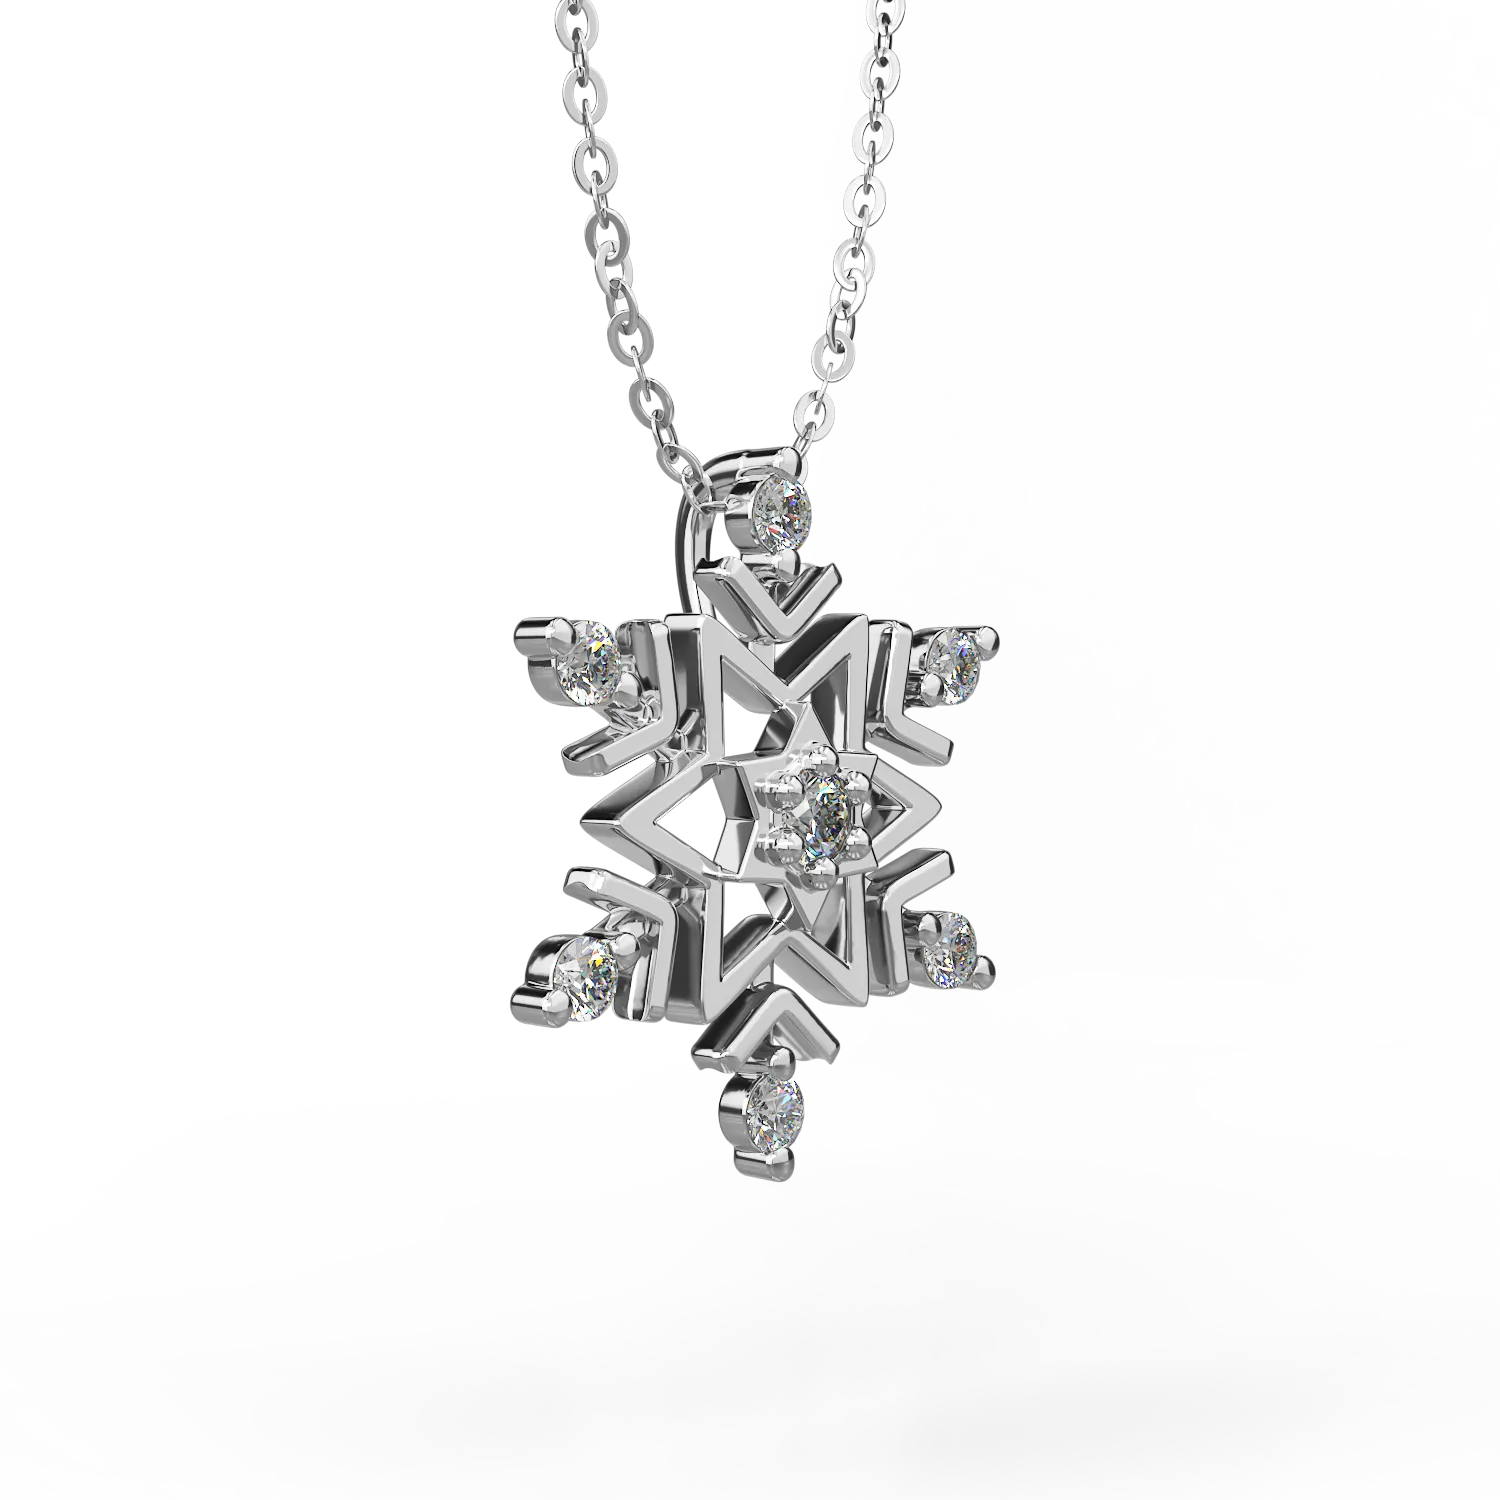 18K white gold chain with snowflake pendant with diamonds of 0.03ct